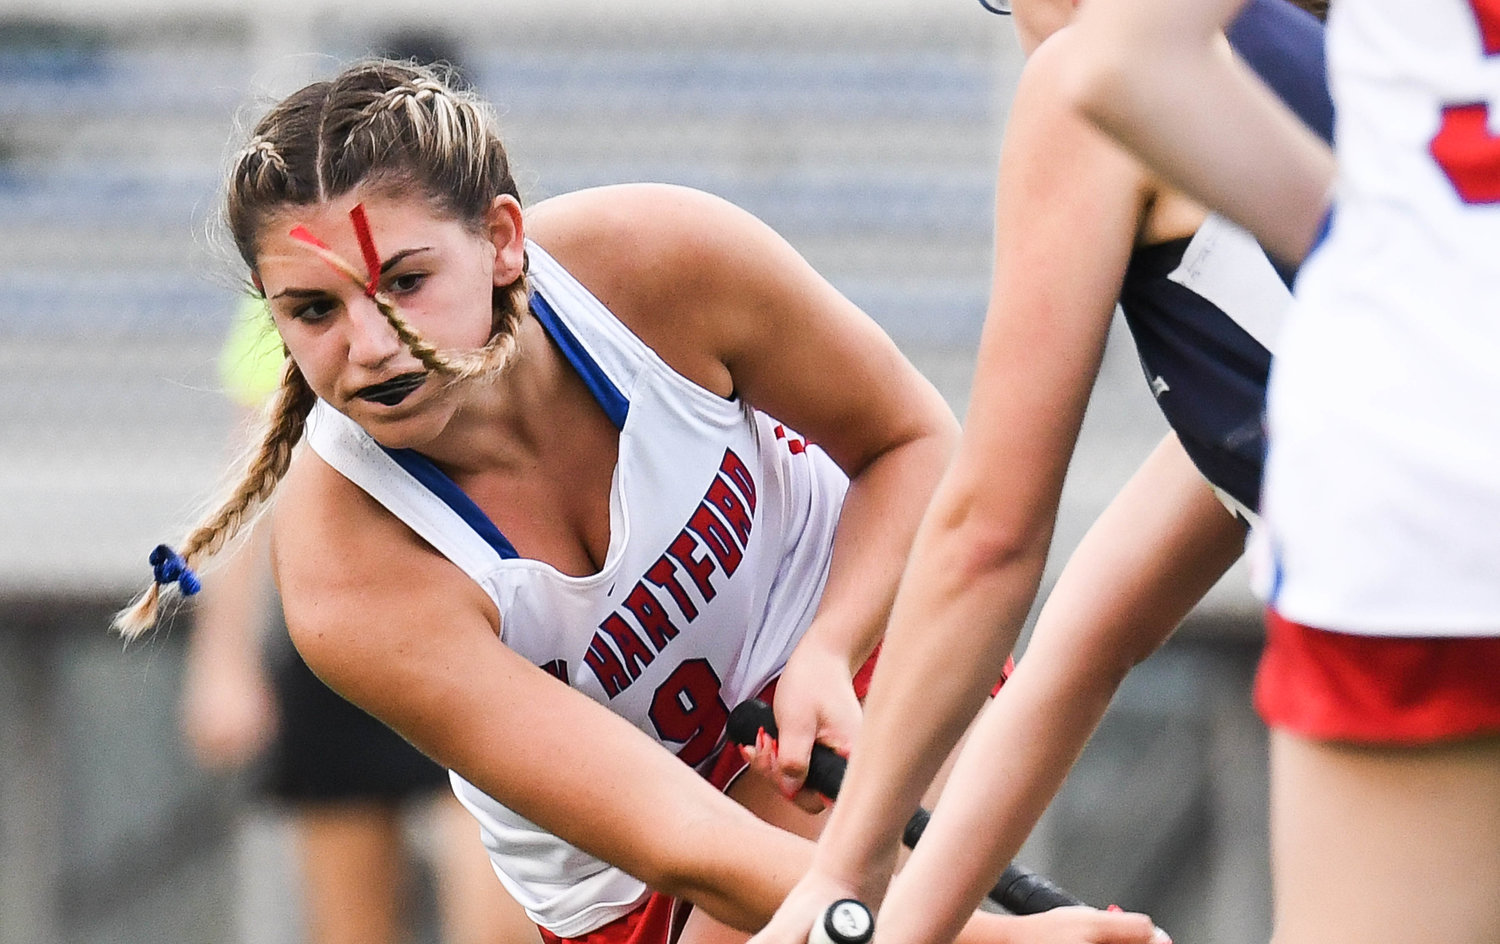 New Hartford player Grace McNamara fires a shot toward the net during the field hockey game against Central Valley Academy on Wednesday. McNamara had an assist as the Spartans won 3-0.